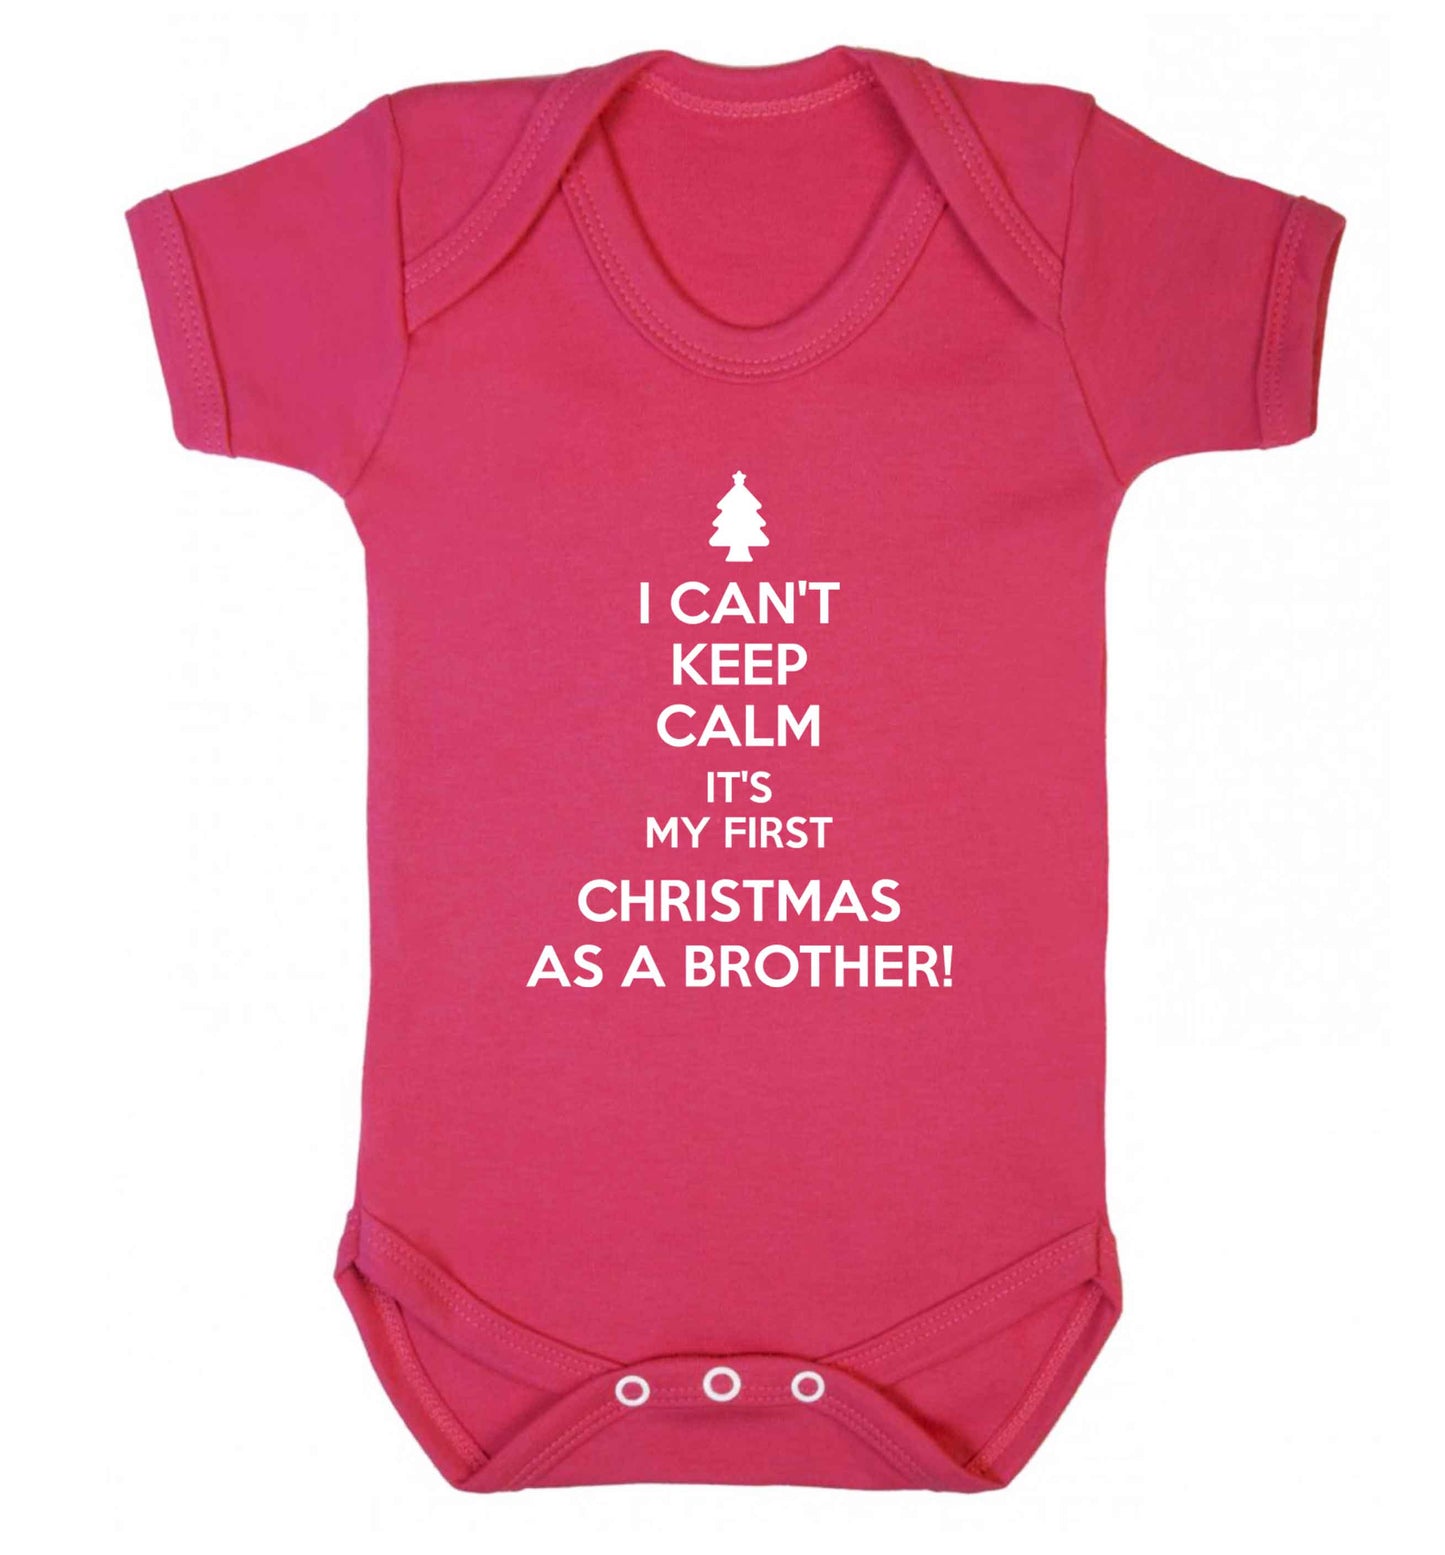 I can't keep calm it's my first Christmas as a brother! Baby Vest dark pink 18-24 months